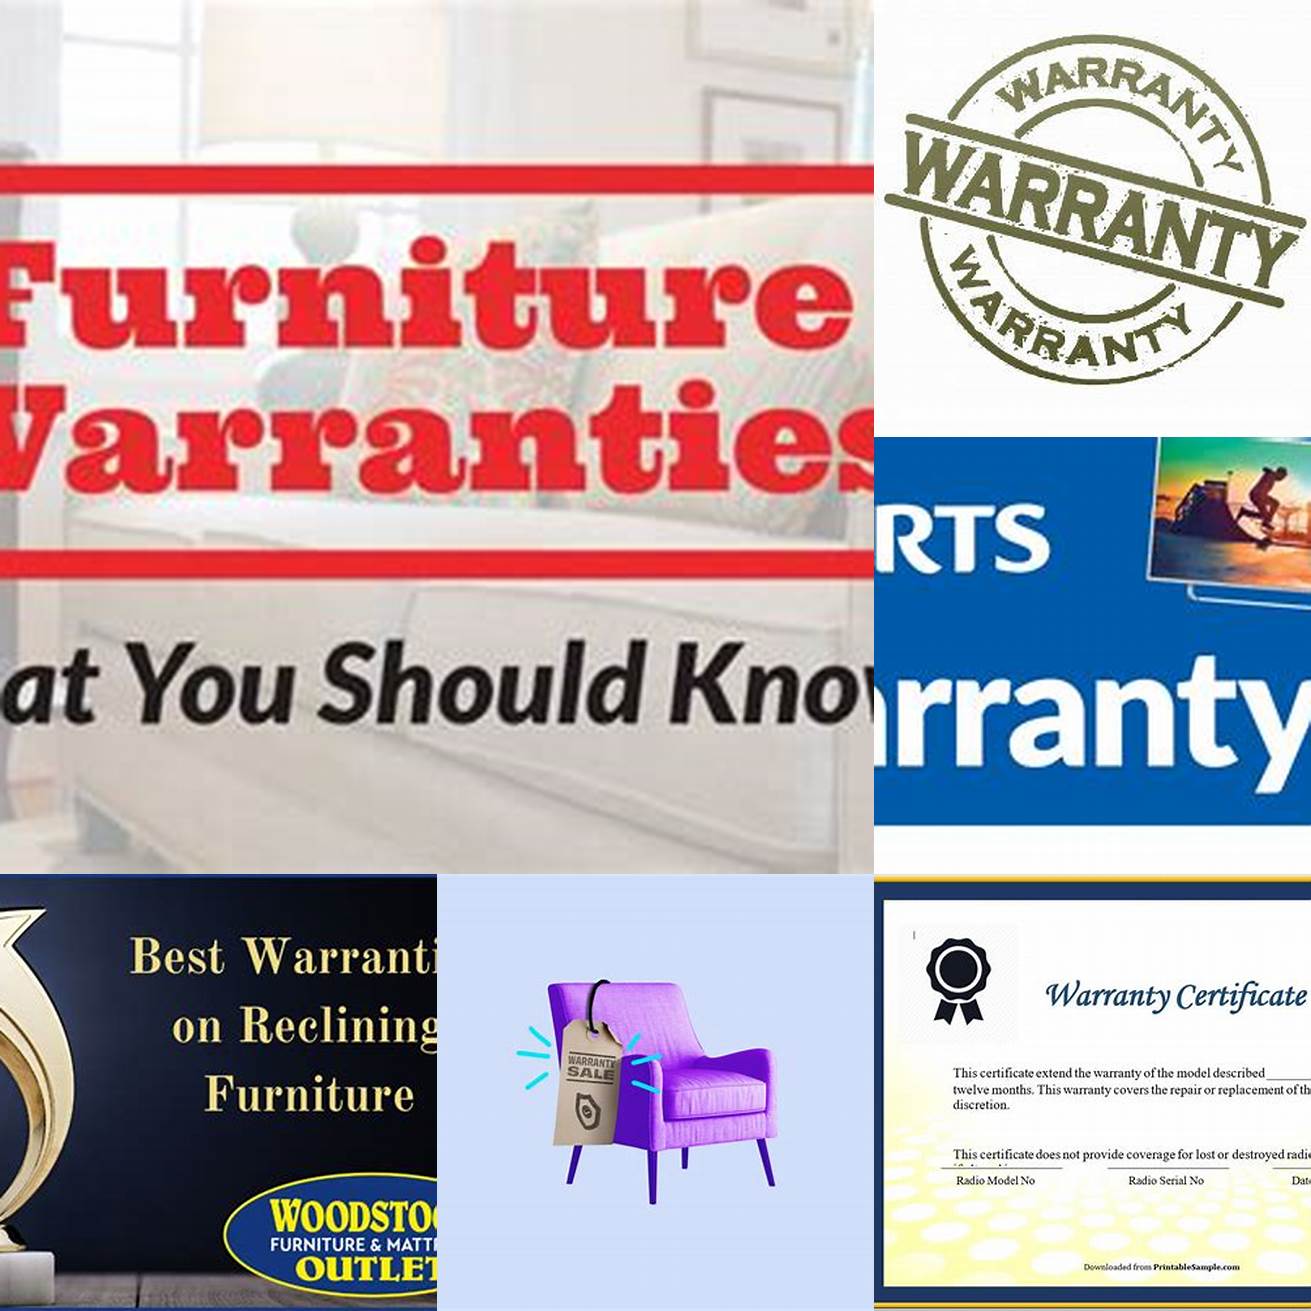 Ask the seller for a guarantee or warranty